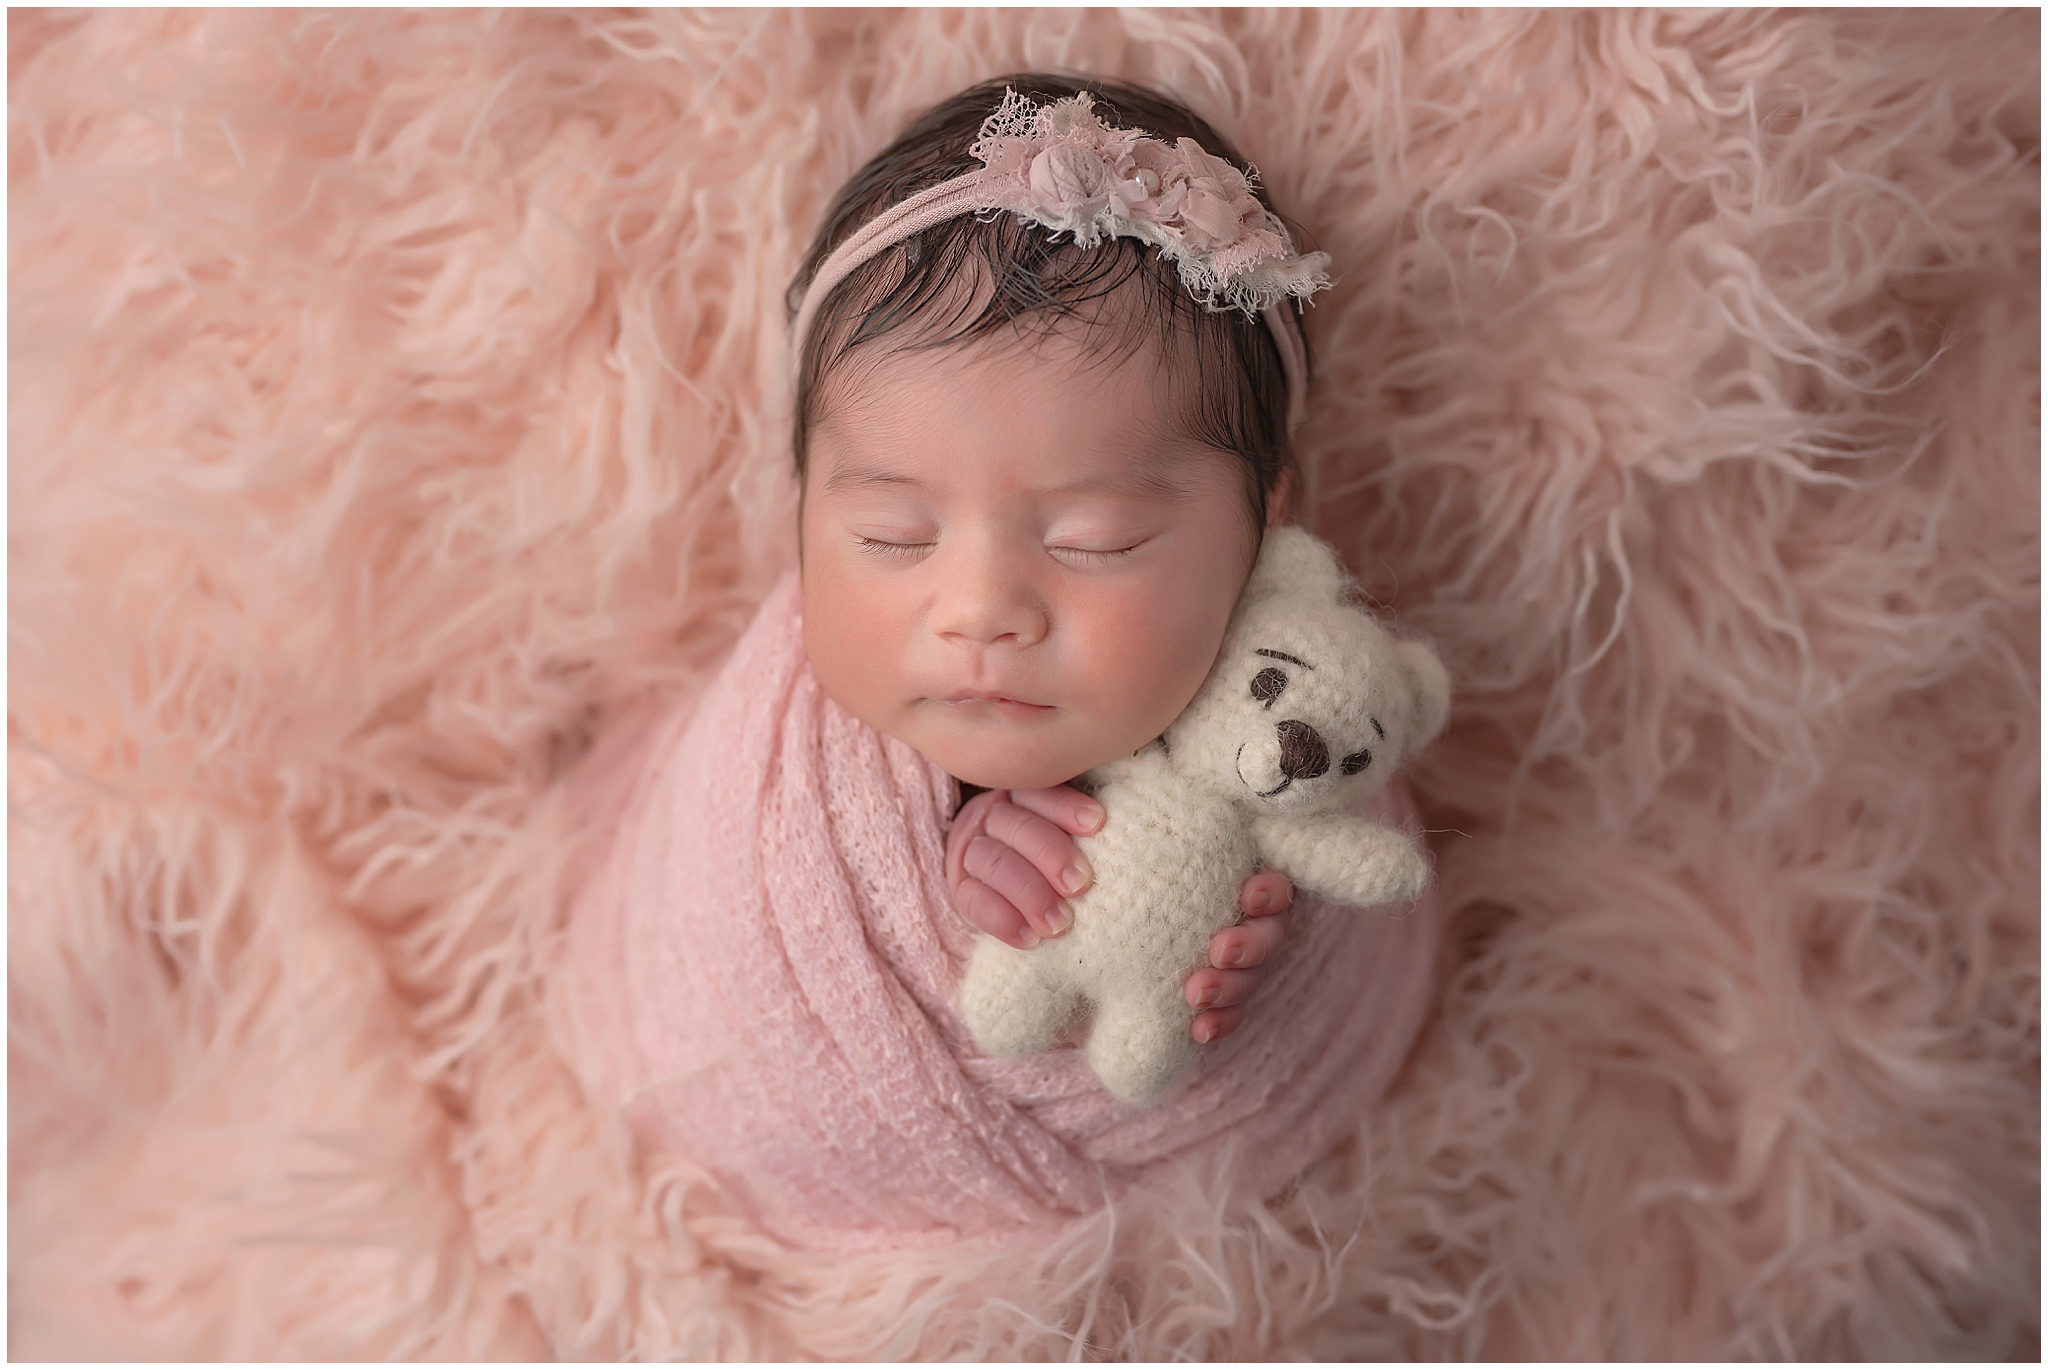 baby girl holding teddy bear during newborn photography session at studio in london ontario